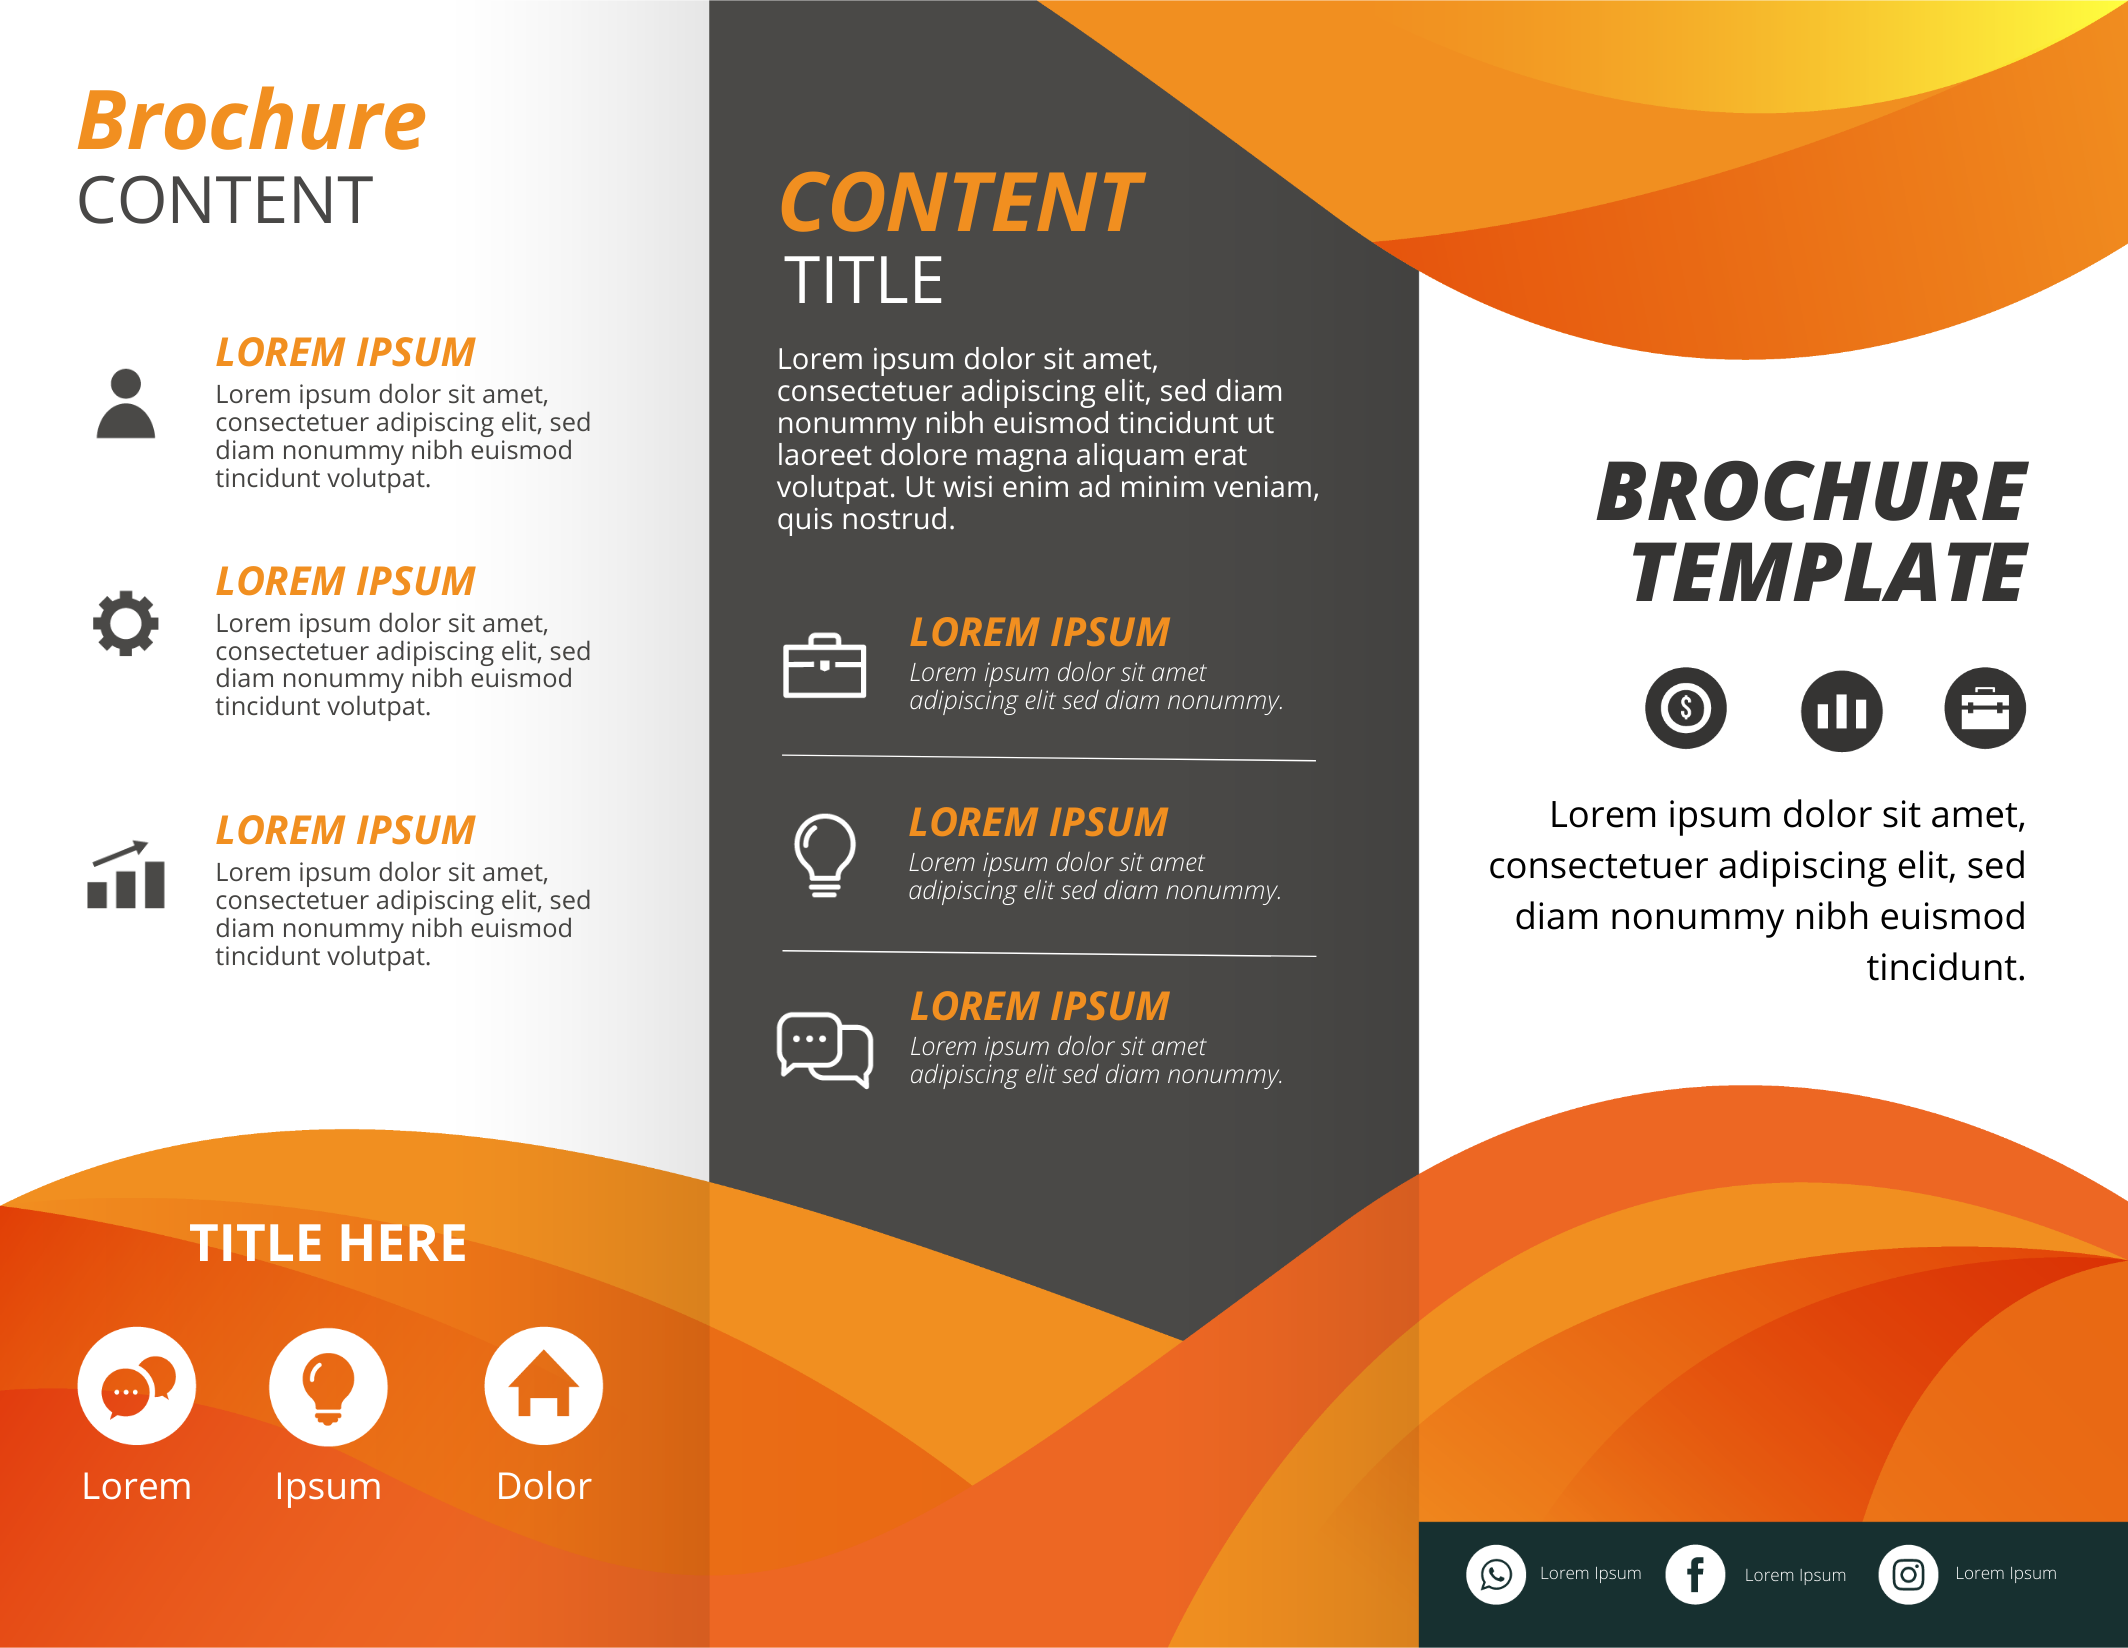 Brochure infographic template